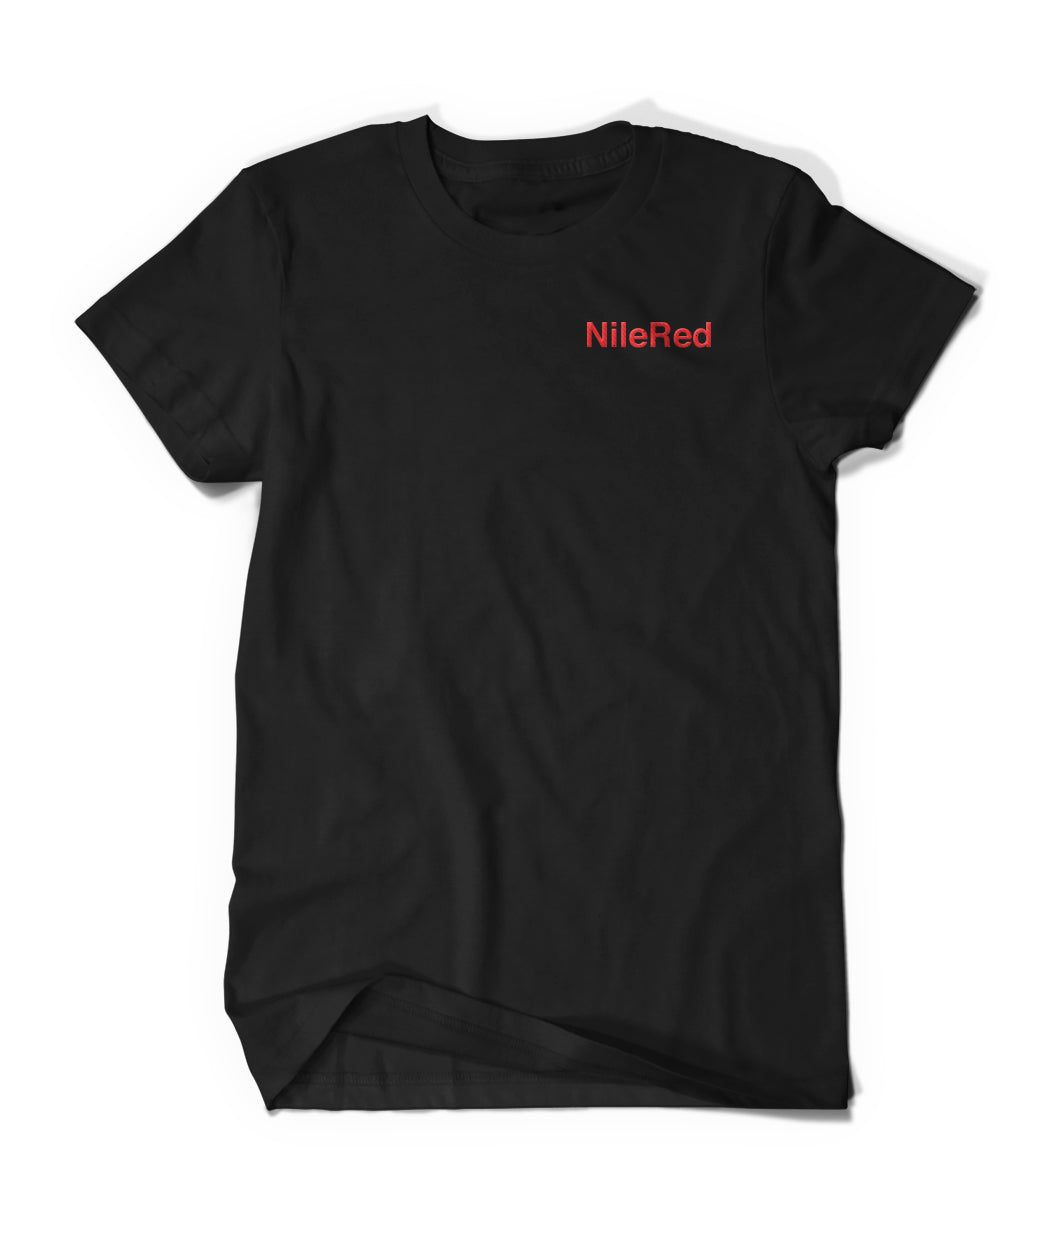 A classic black t-shirt with 